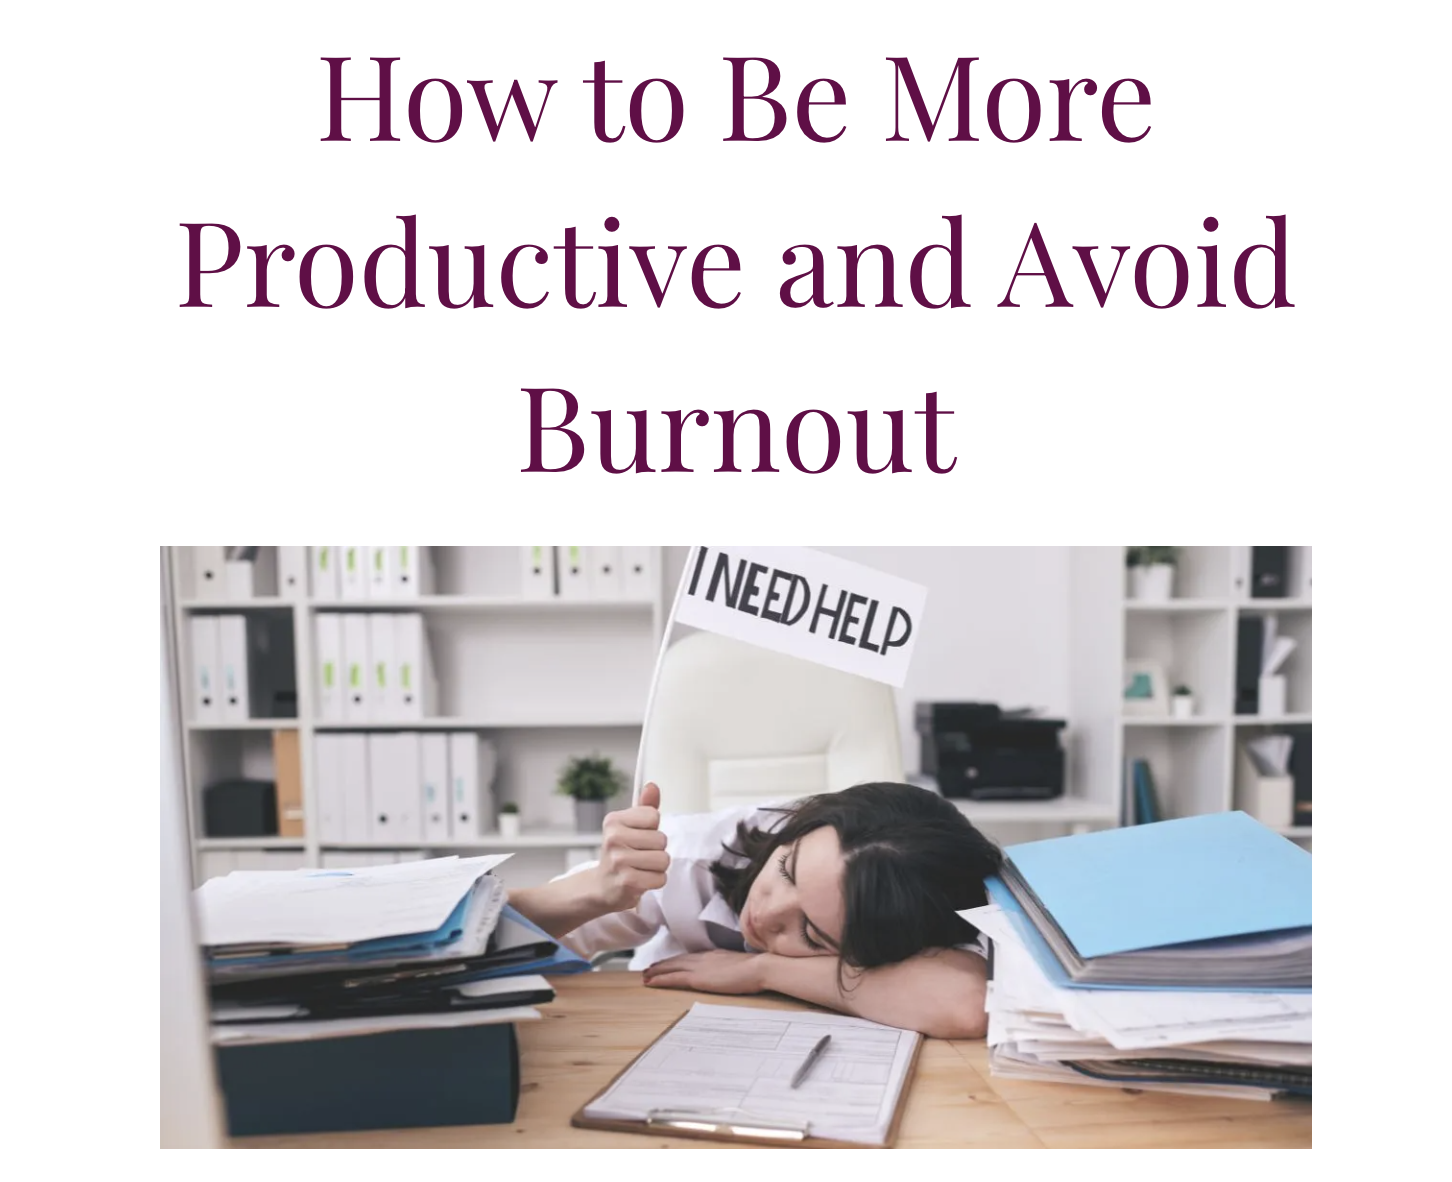 How to Be More Productive and Avoid Burnout